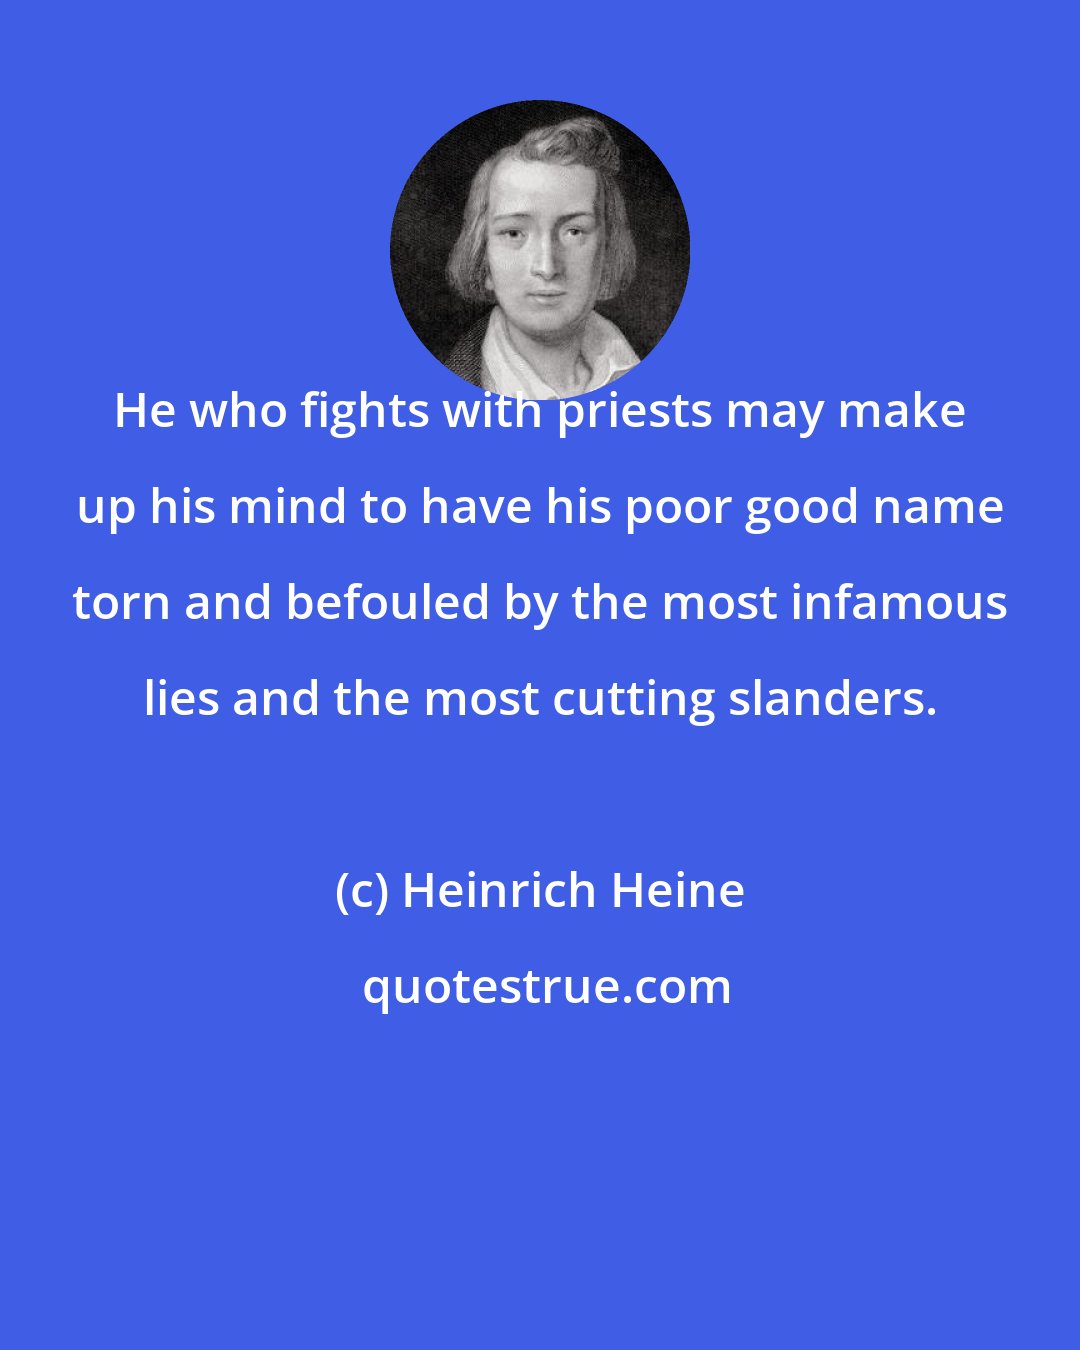 Heinrich Heine: He who fights with priests may make up his mind to have his poor good name torn and befouled by the most infamous lies and the most cutting slanders.